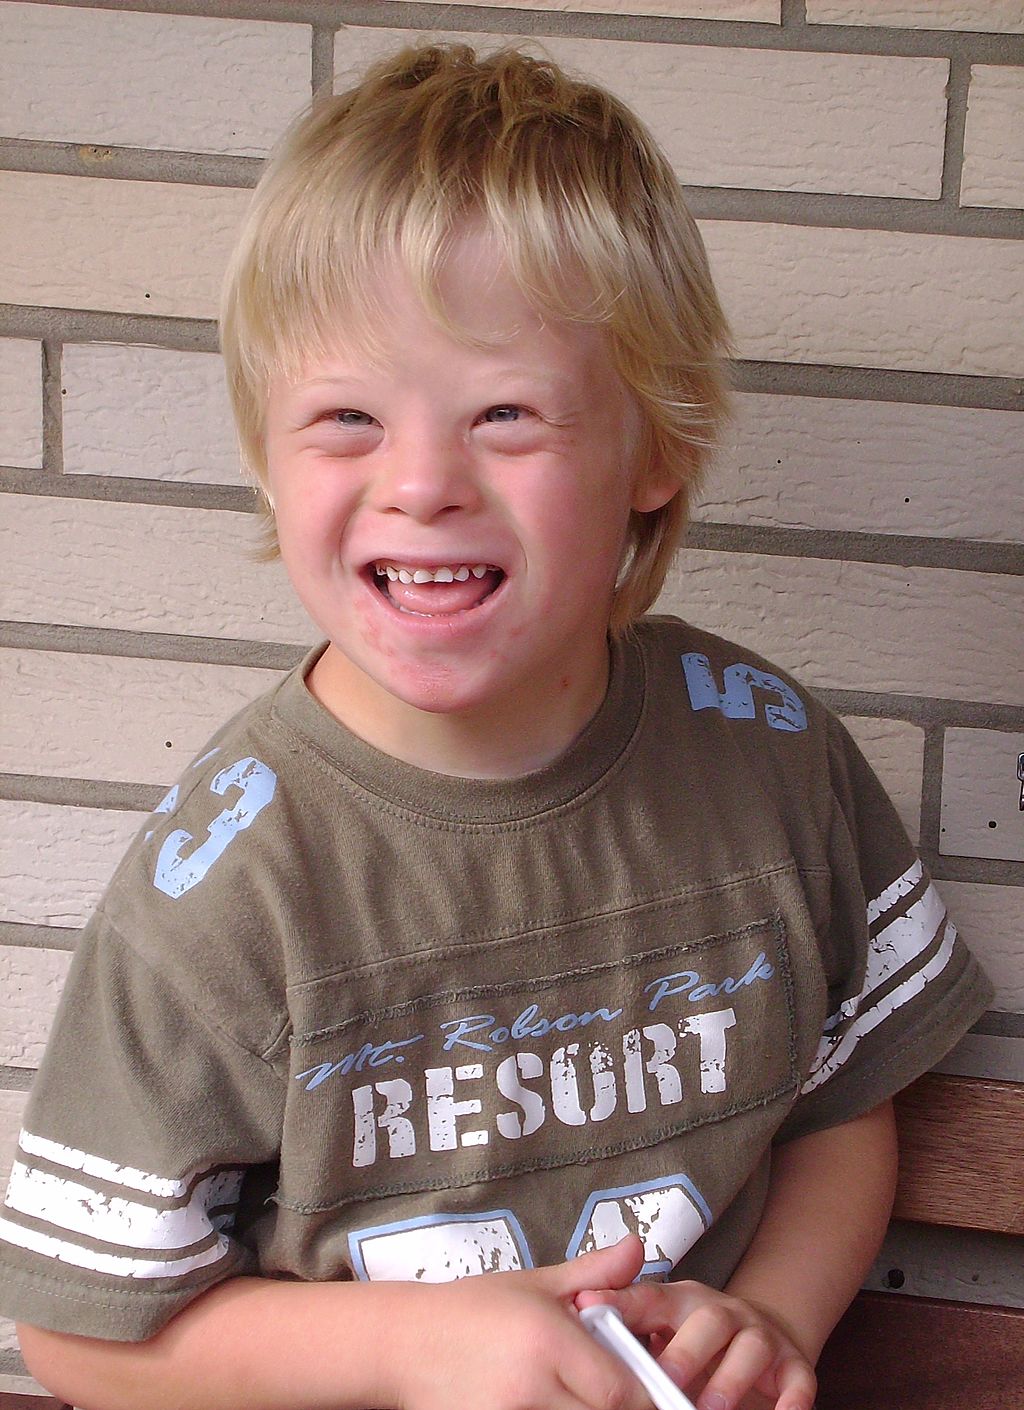 Image shows an image of a young boy with Down Syndrome.